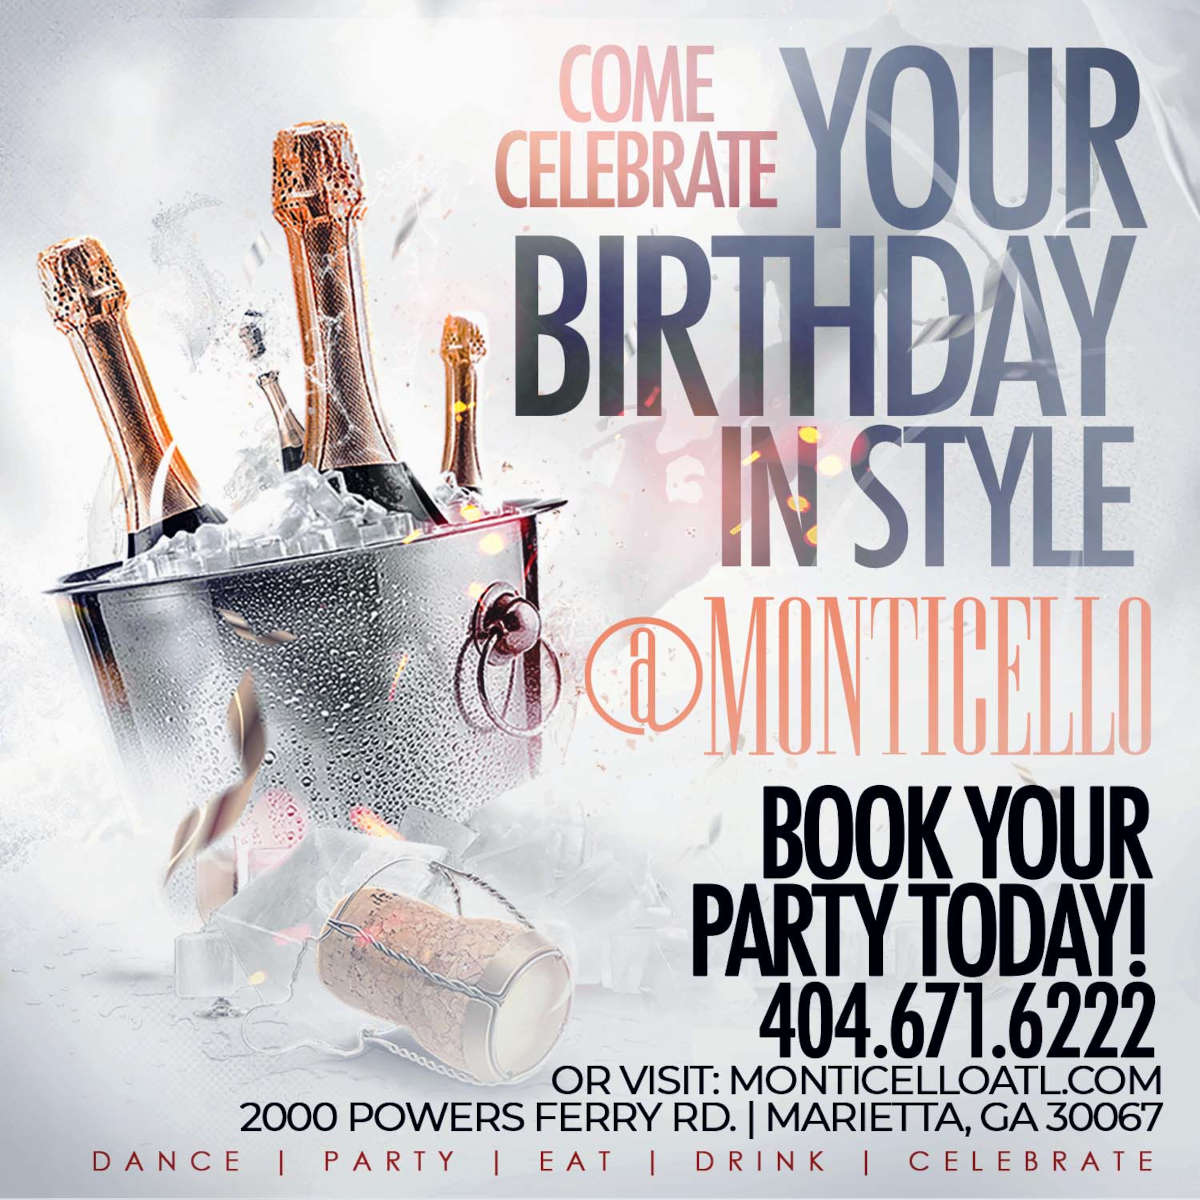 Book your party flyer